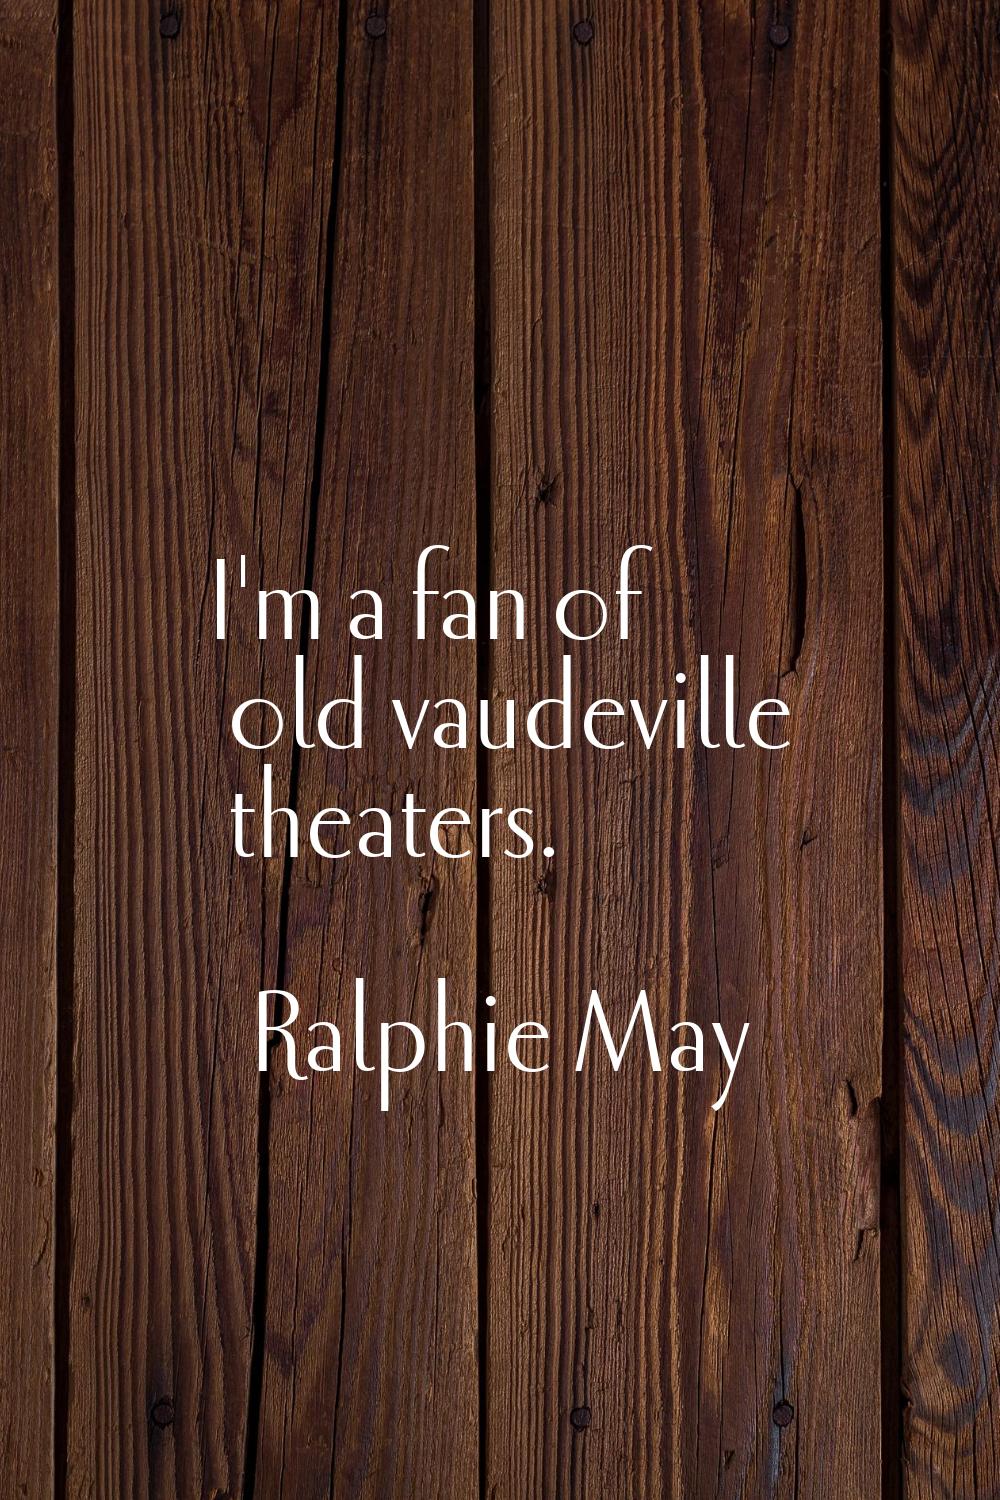 I'm a fan of old vaudeville theaters.